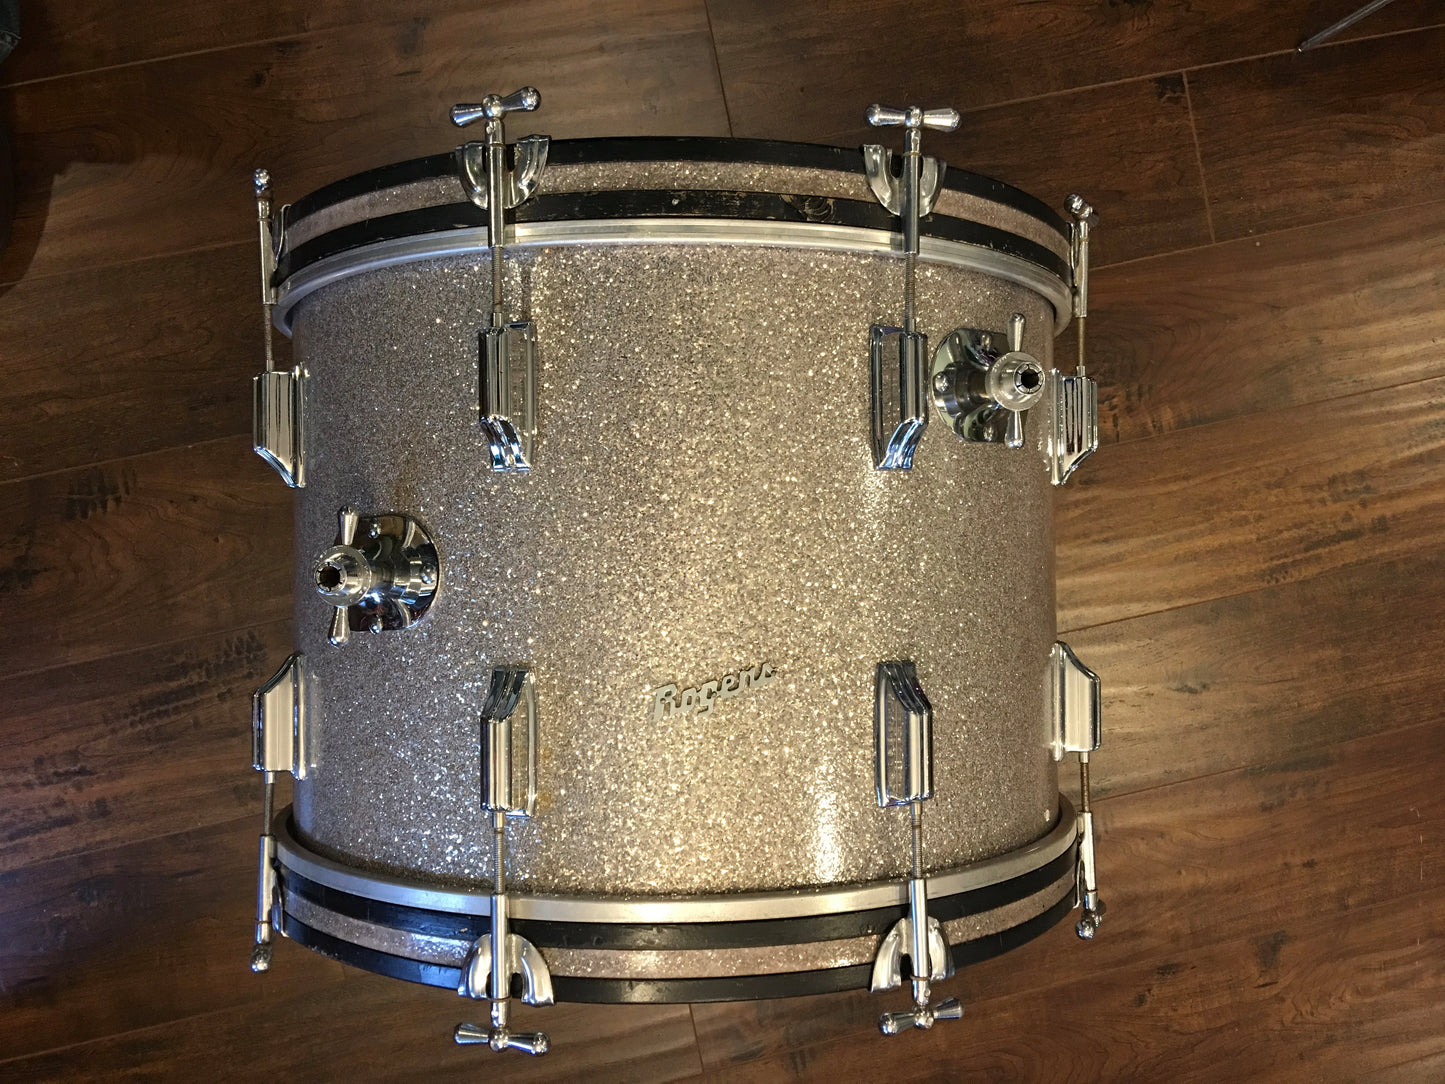 1960's Rogers Cleveland 14x20 Holiday Silver Glass Glitter Sparkle Bass Drum